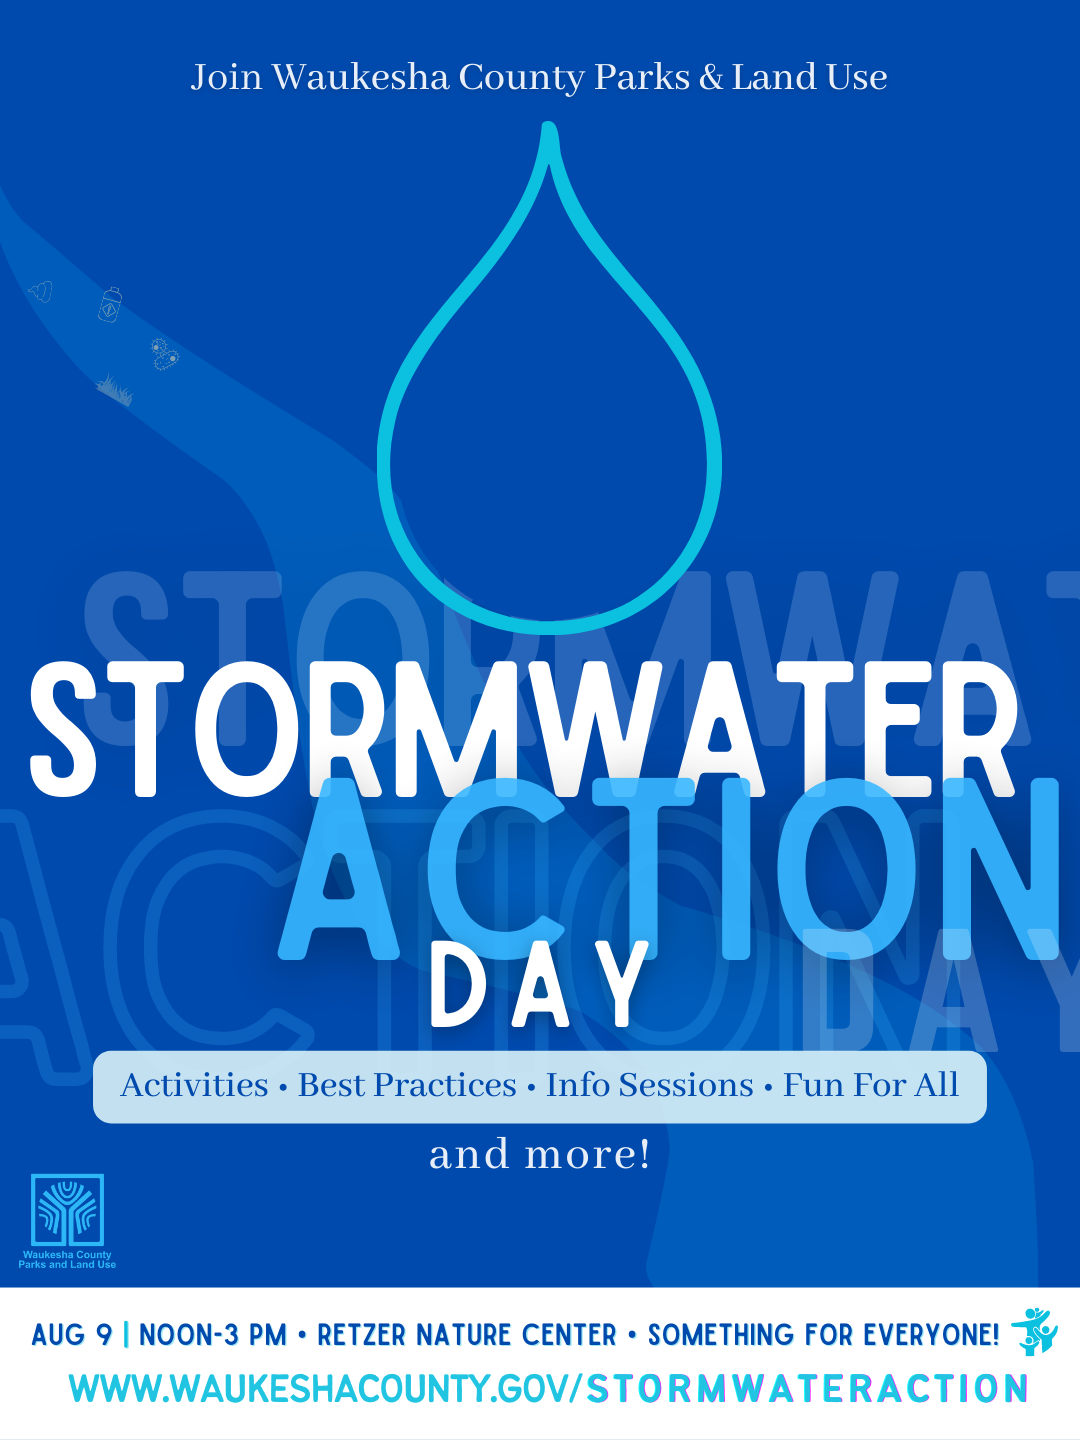 Stormwater Action Day image describes family fun event at Retzer Nature Center